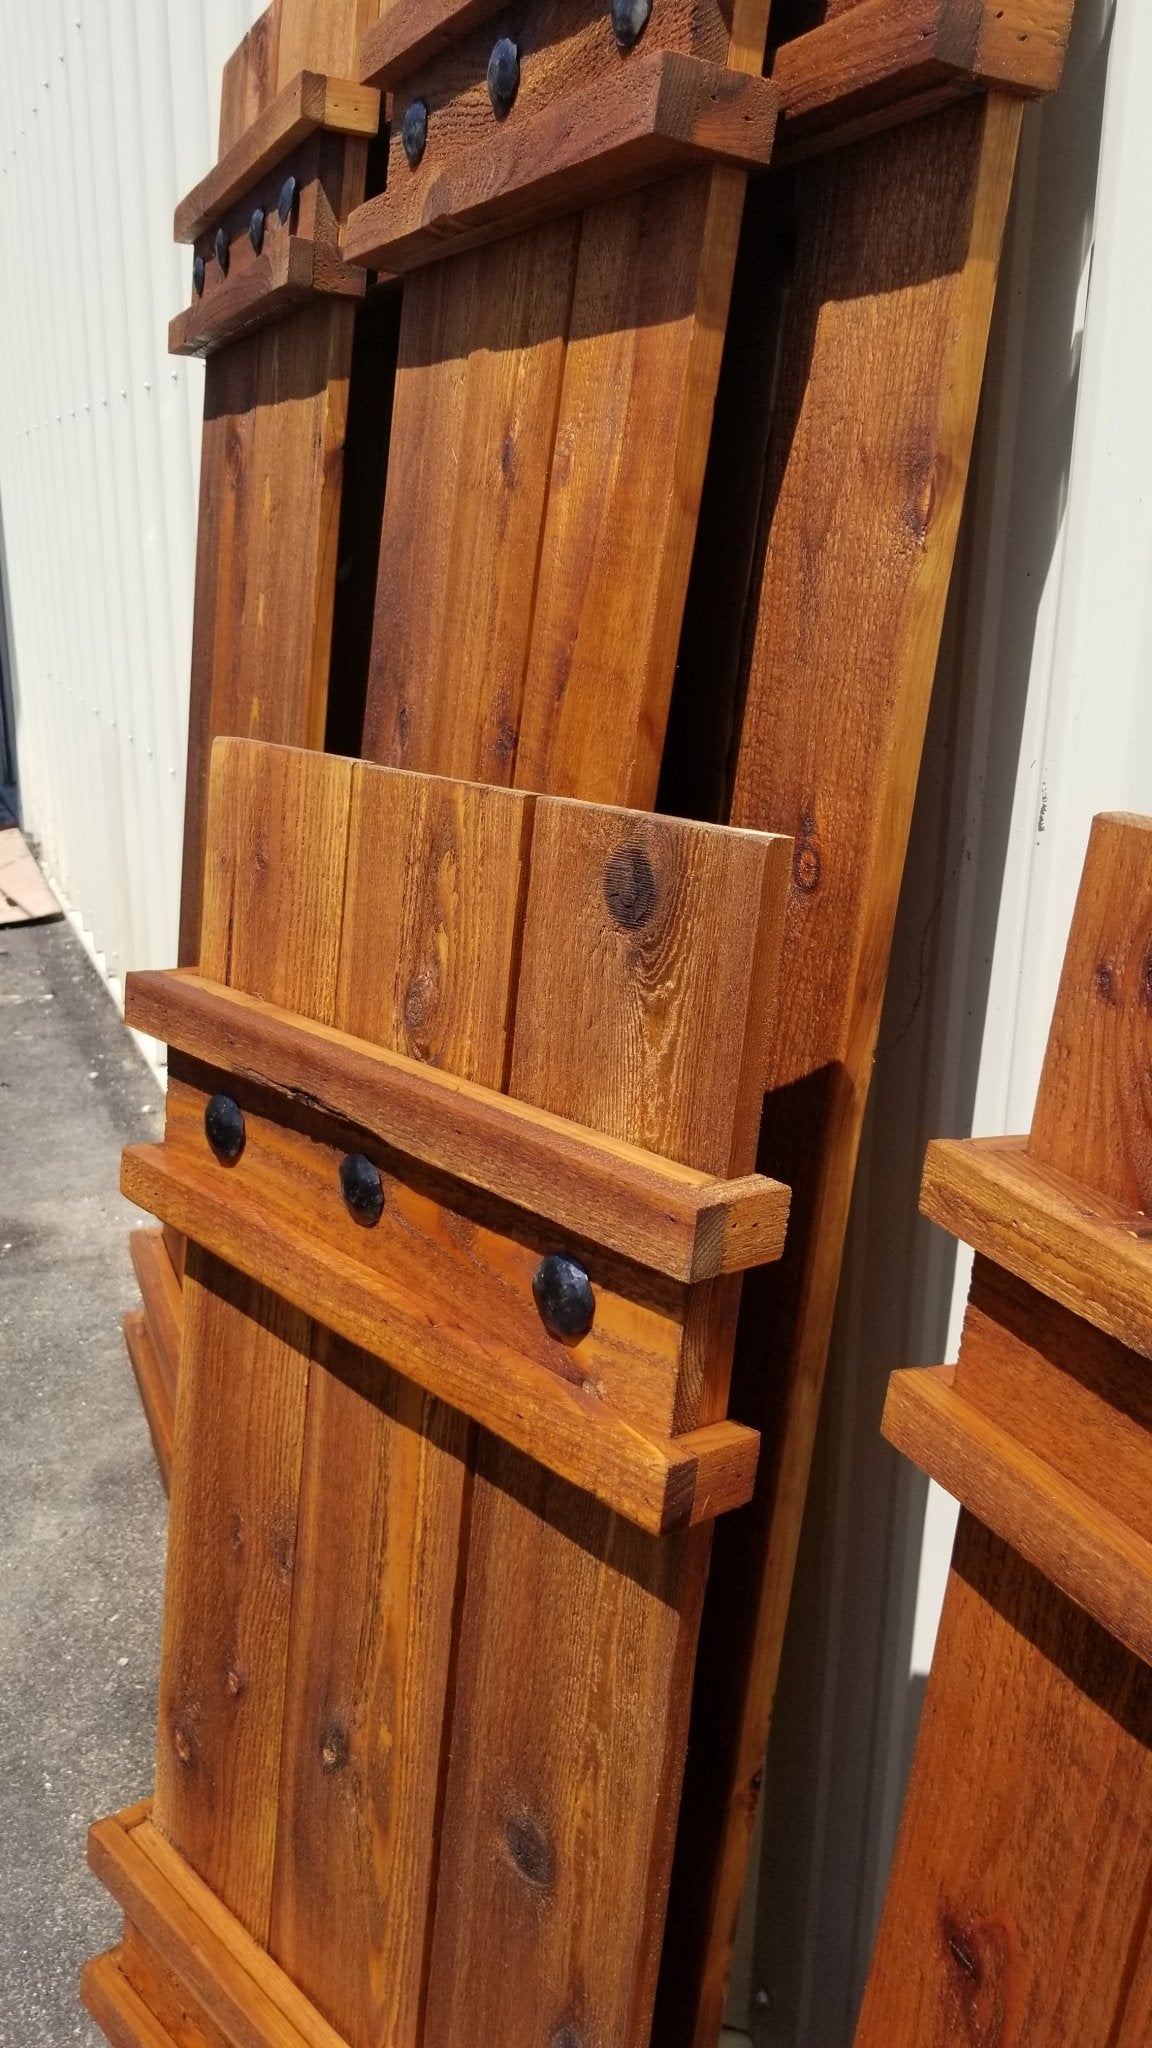 Customized cedar wood shutters with attached hardware